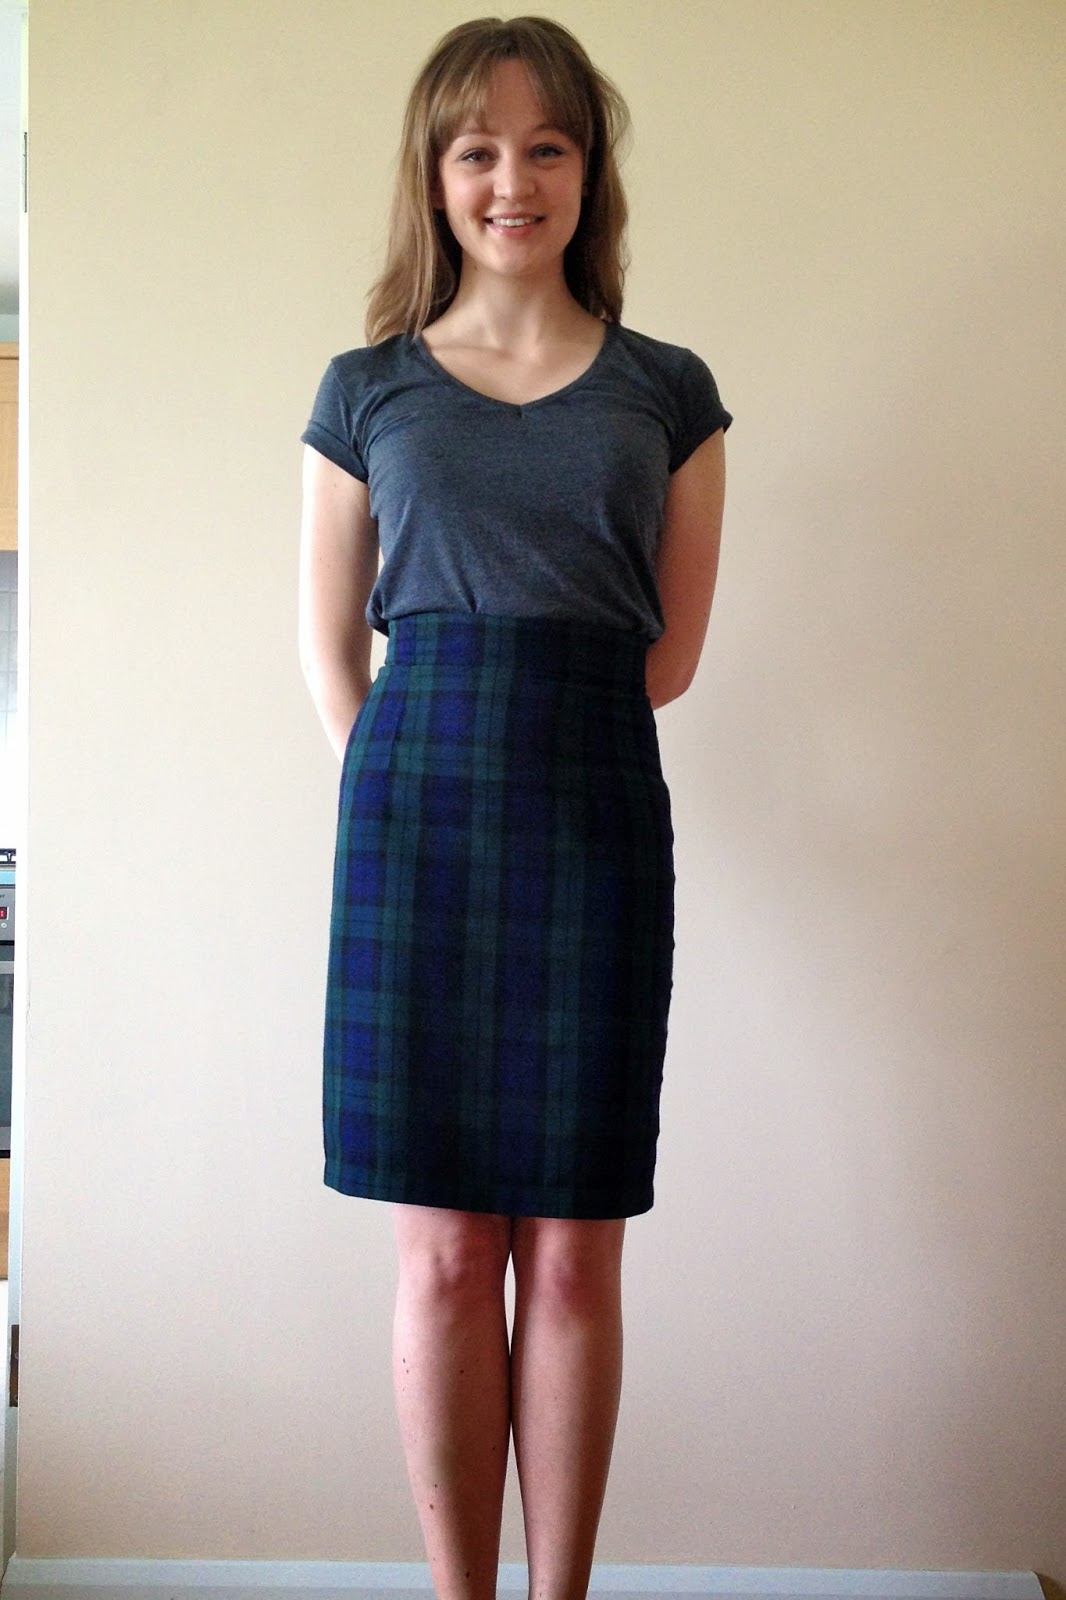 Diary of a Chain Stitcher : Two Ultimate Pencil Skirts